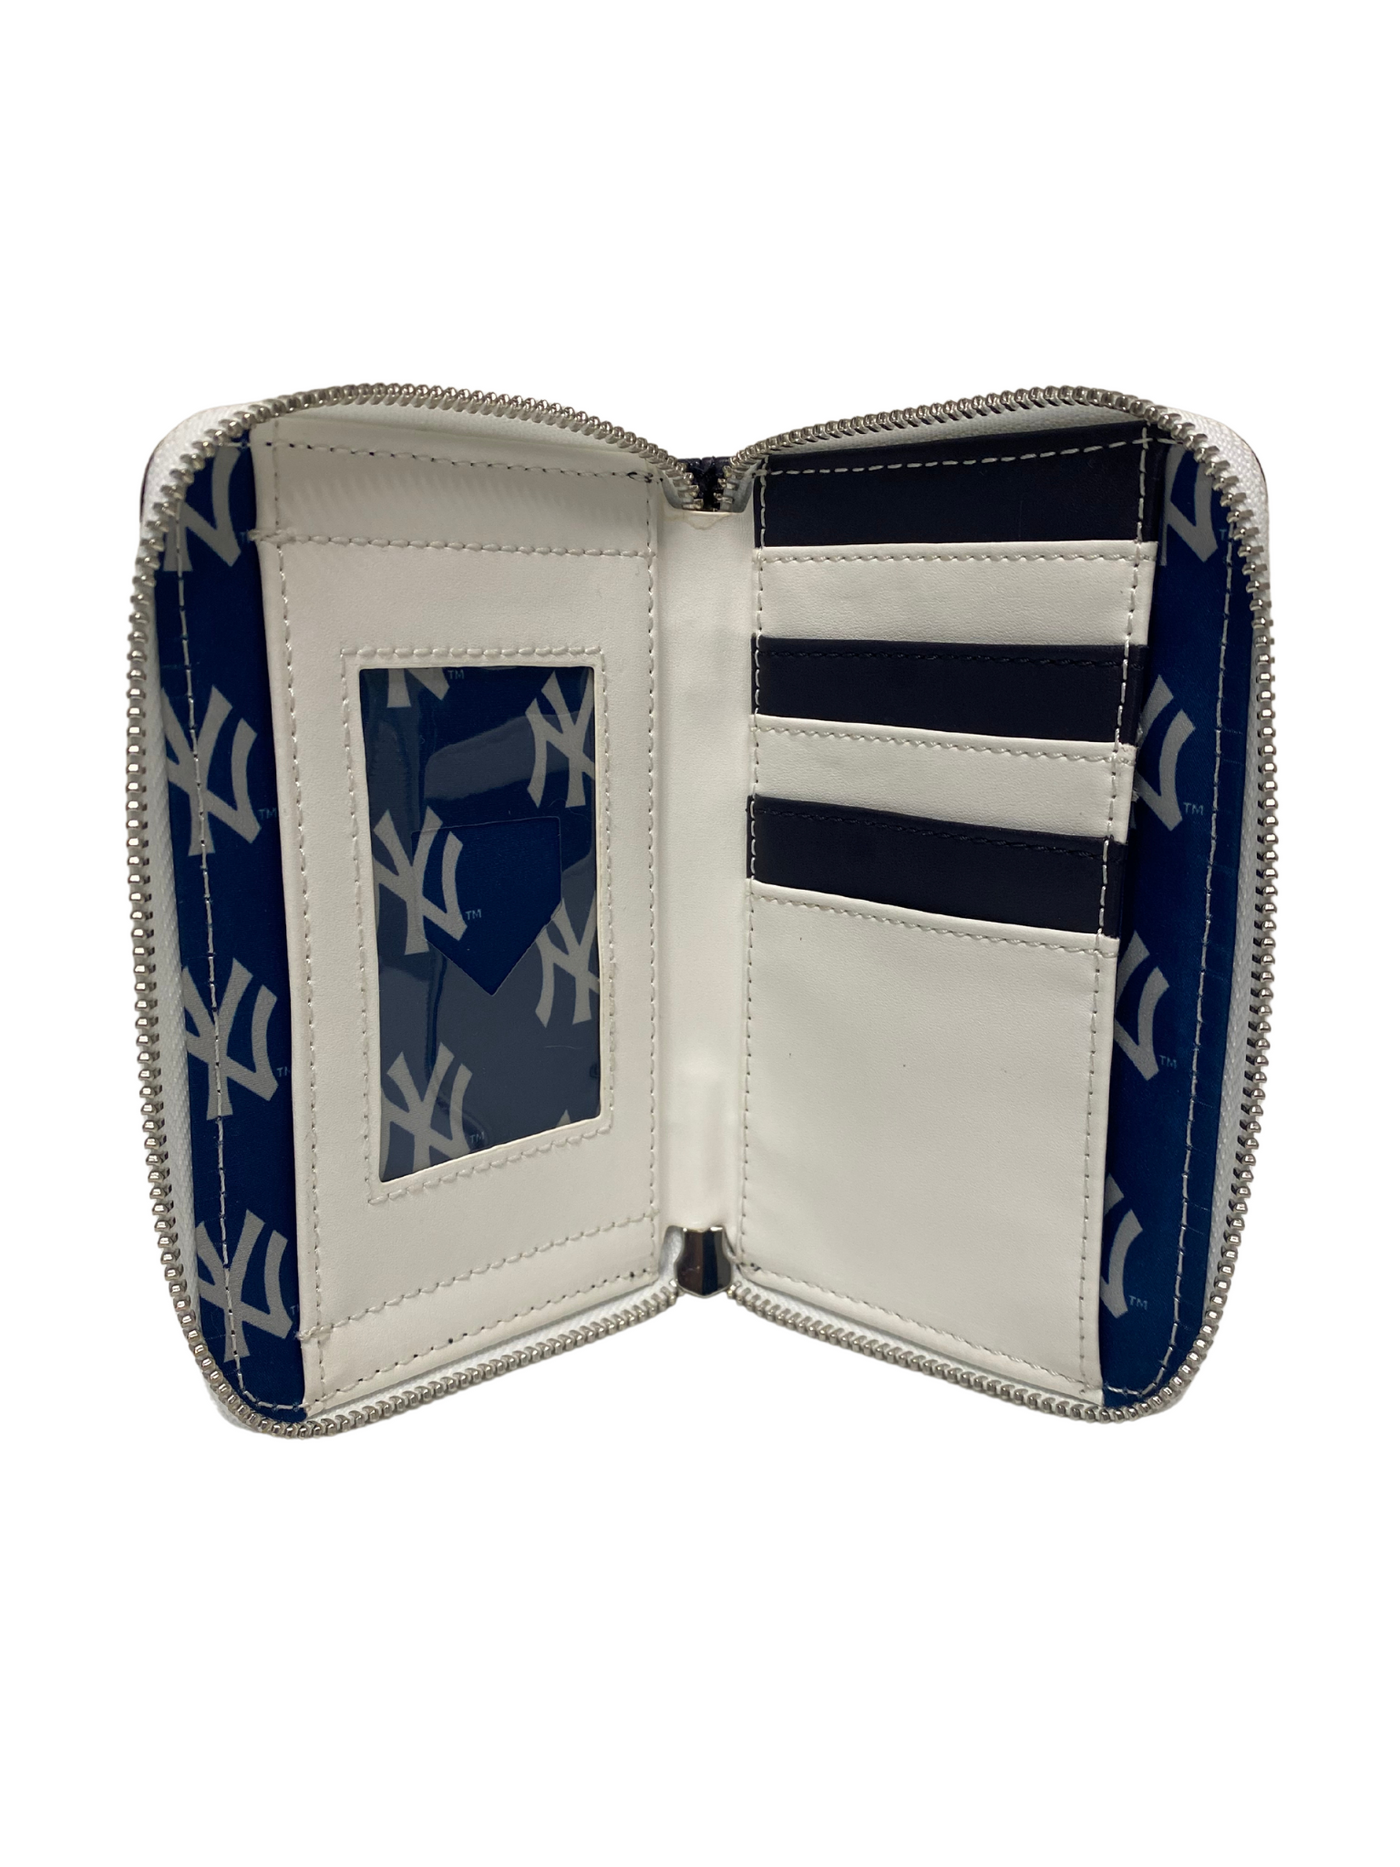 Los Angeles Dodgers Loungefly Patches Accordion Wallet